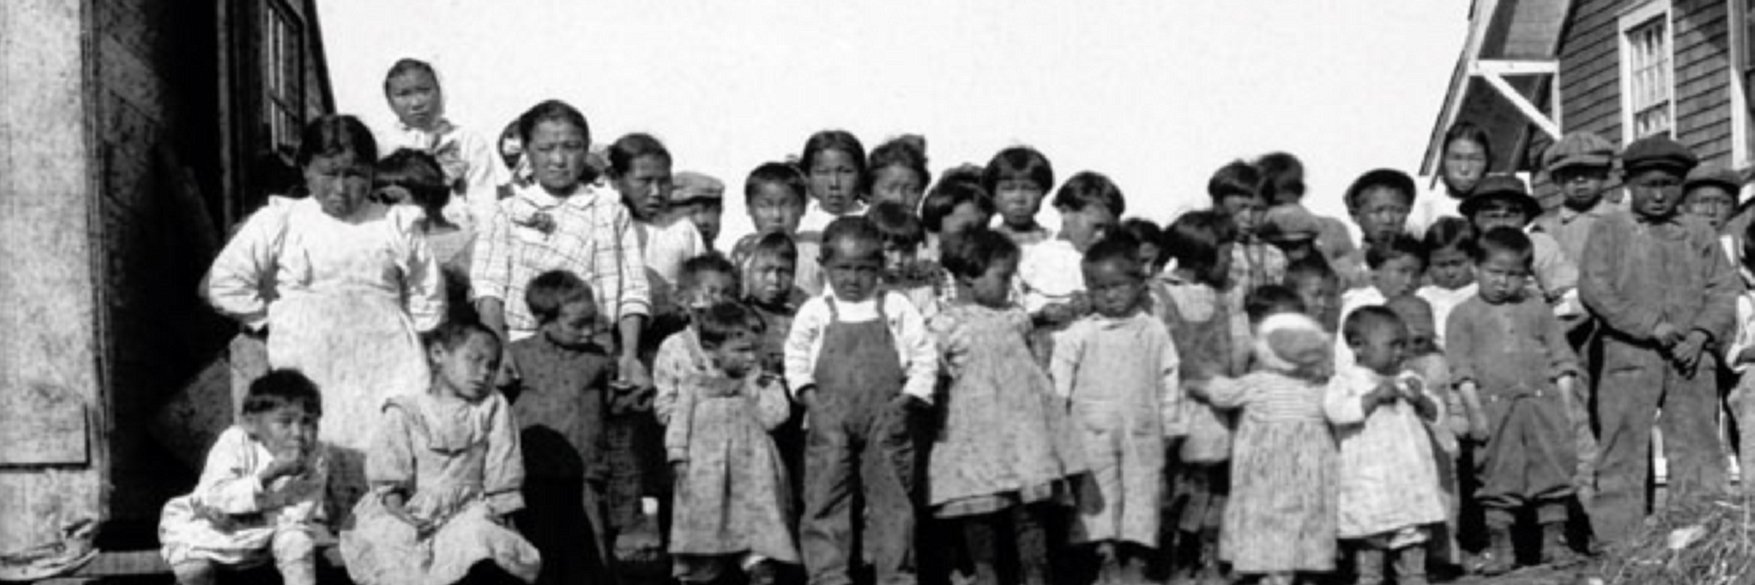 The 1918-20 influenza pandemic hit the native communities in Alaska hard. These children in an orphanage in Nushagak, Alaska, lost their parents. Summer of 1919. Source: Alaska Historical Library